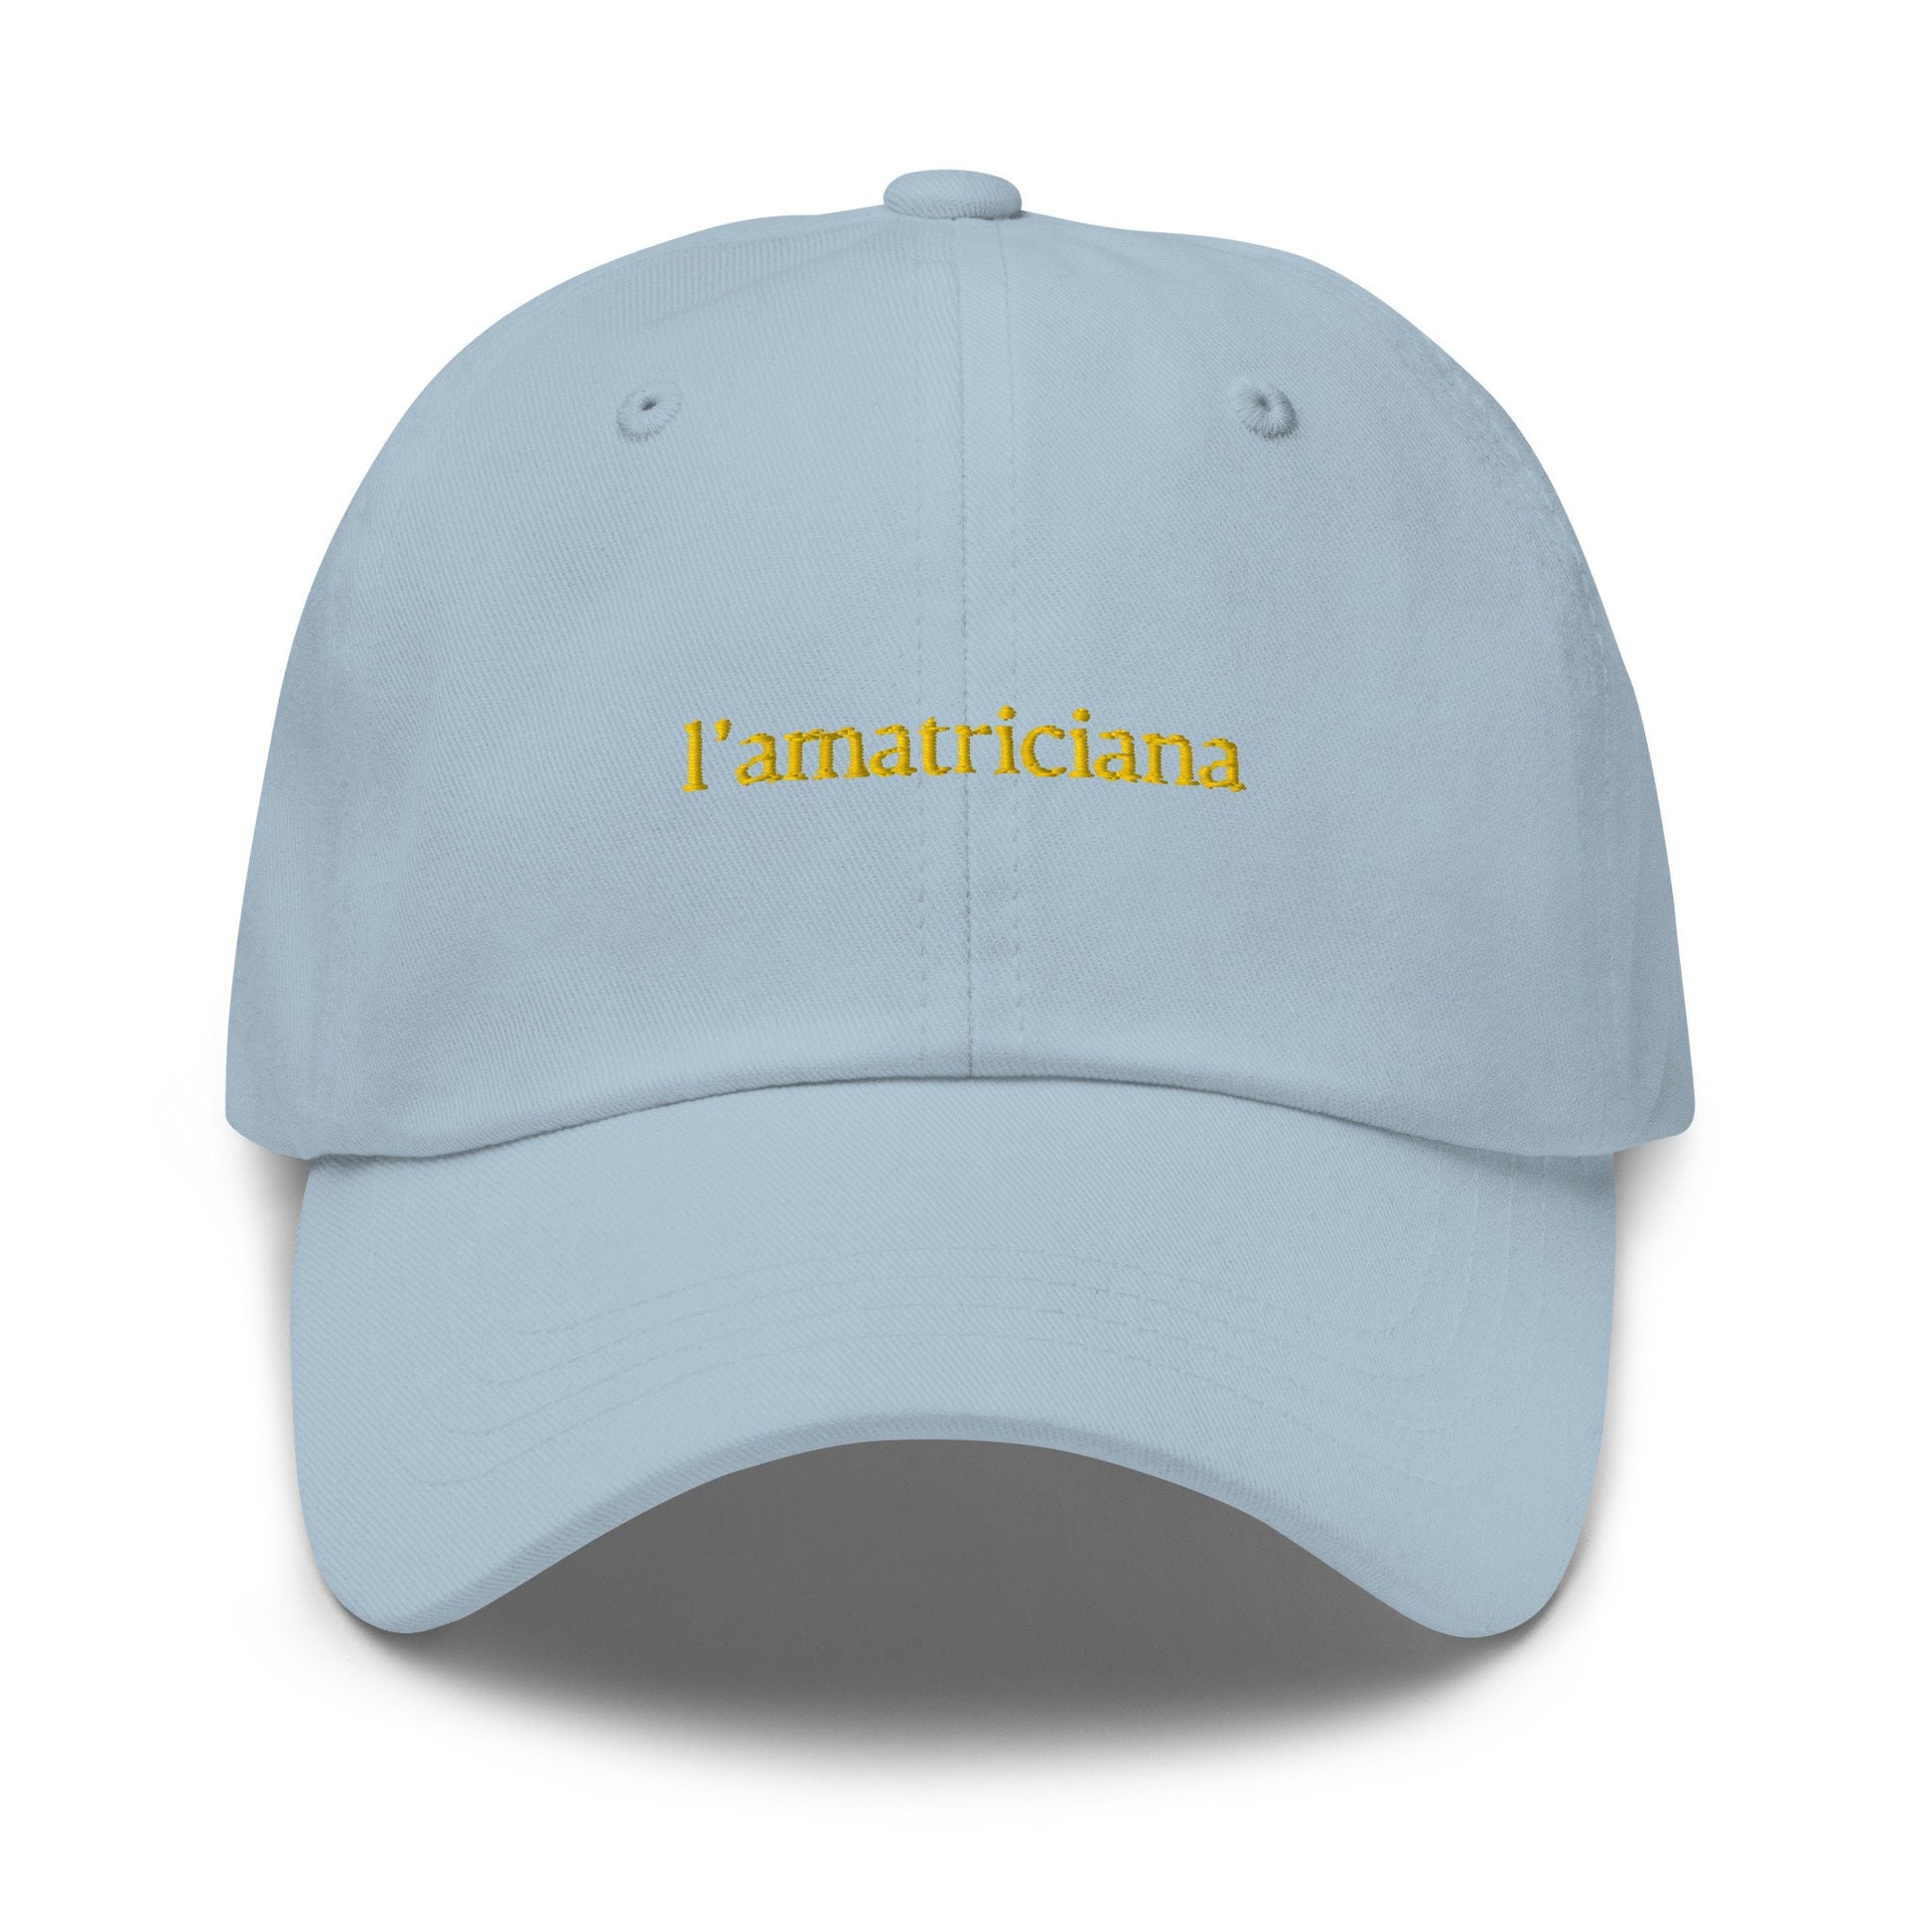 L’Amatriciana Dad Hat - Gift for Italian pasta lovers - Cotton embroidered Cap